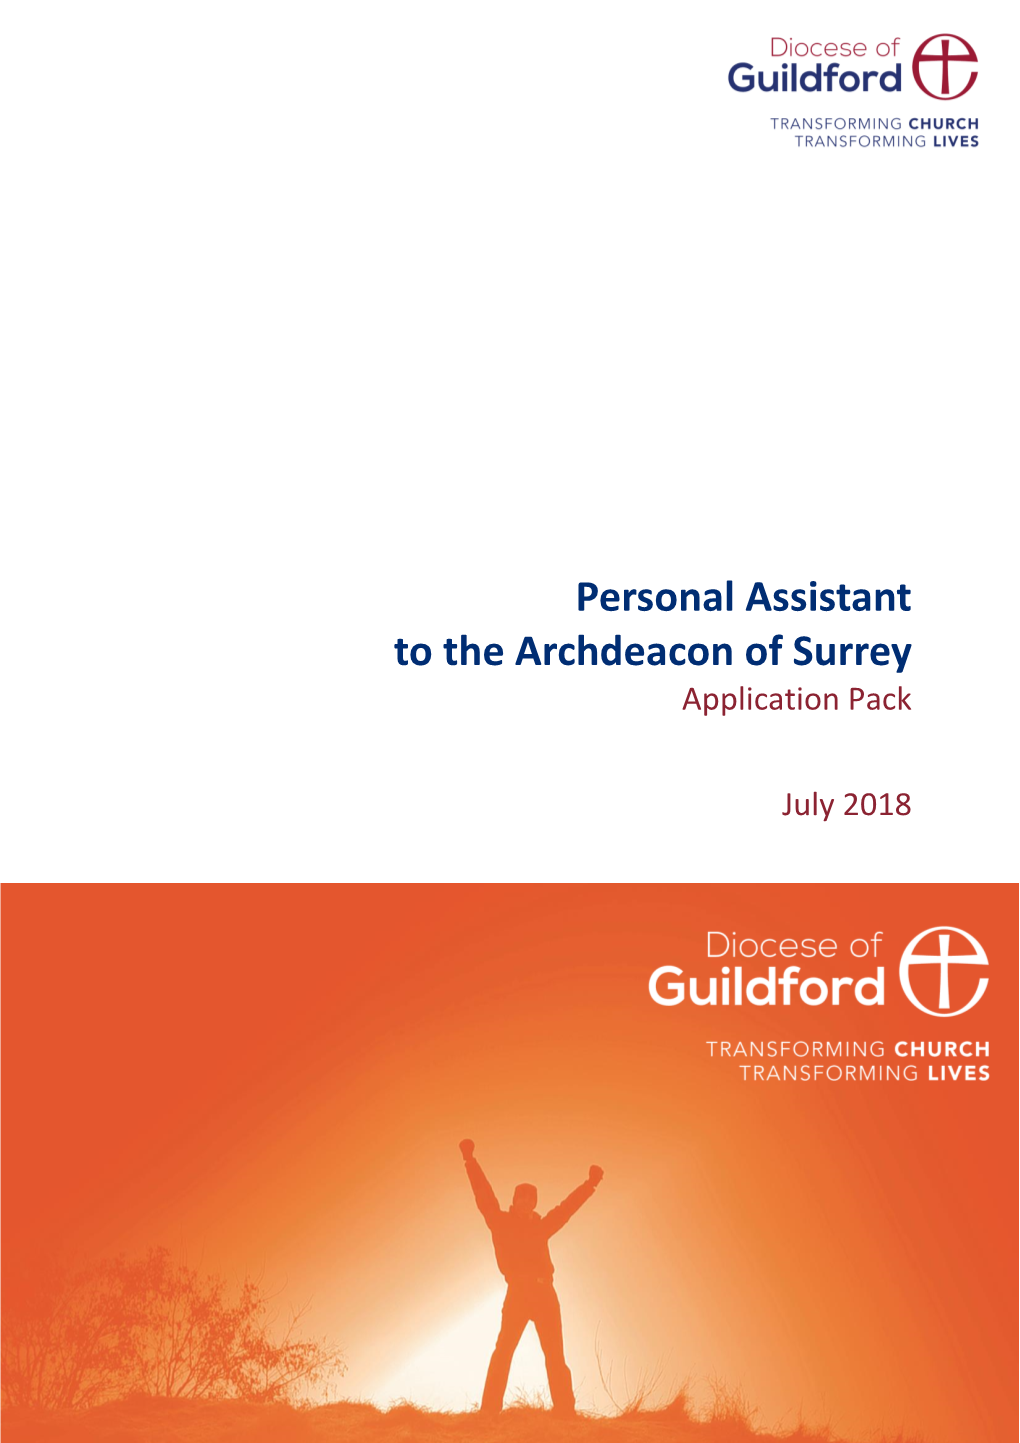 Personal Assistant to the Archdeacon of Surrey Application Pack